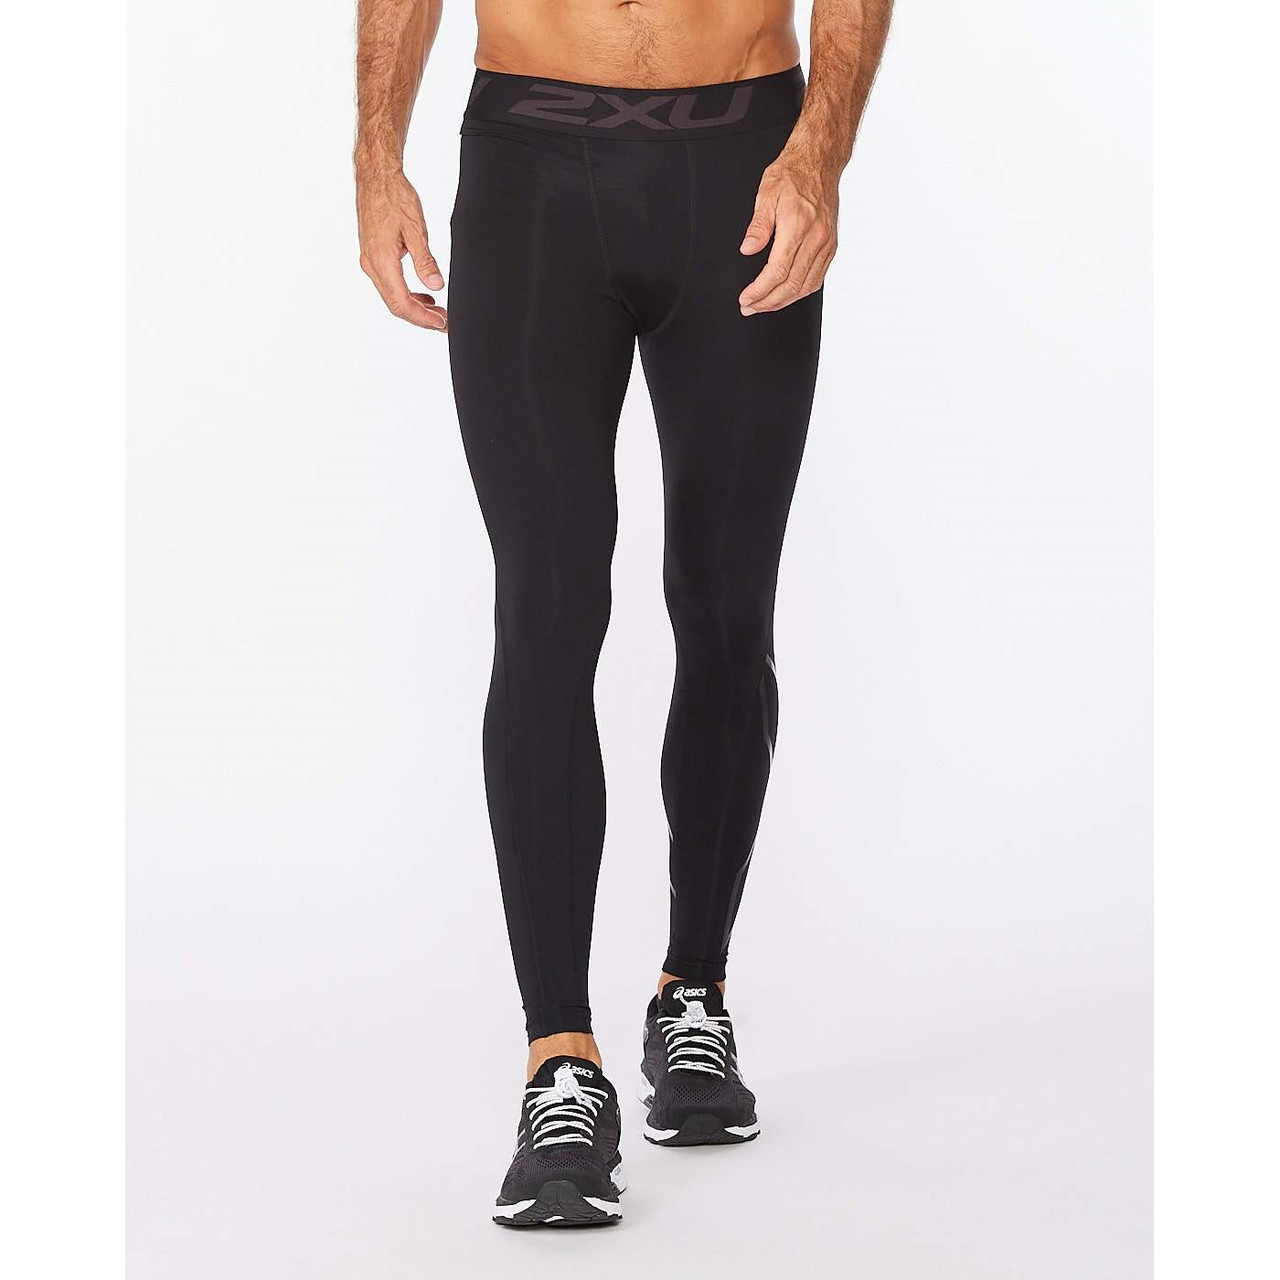 Buy 2XU Mens Ignition Shield Compression Tights Powerful Support